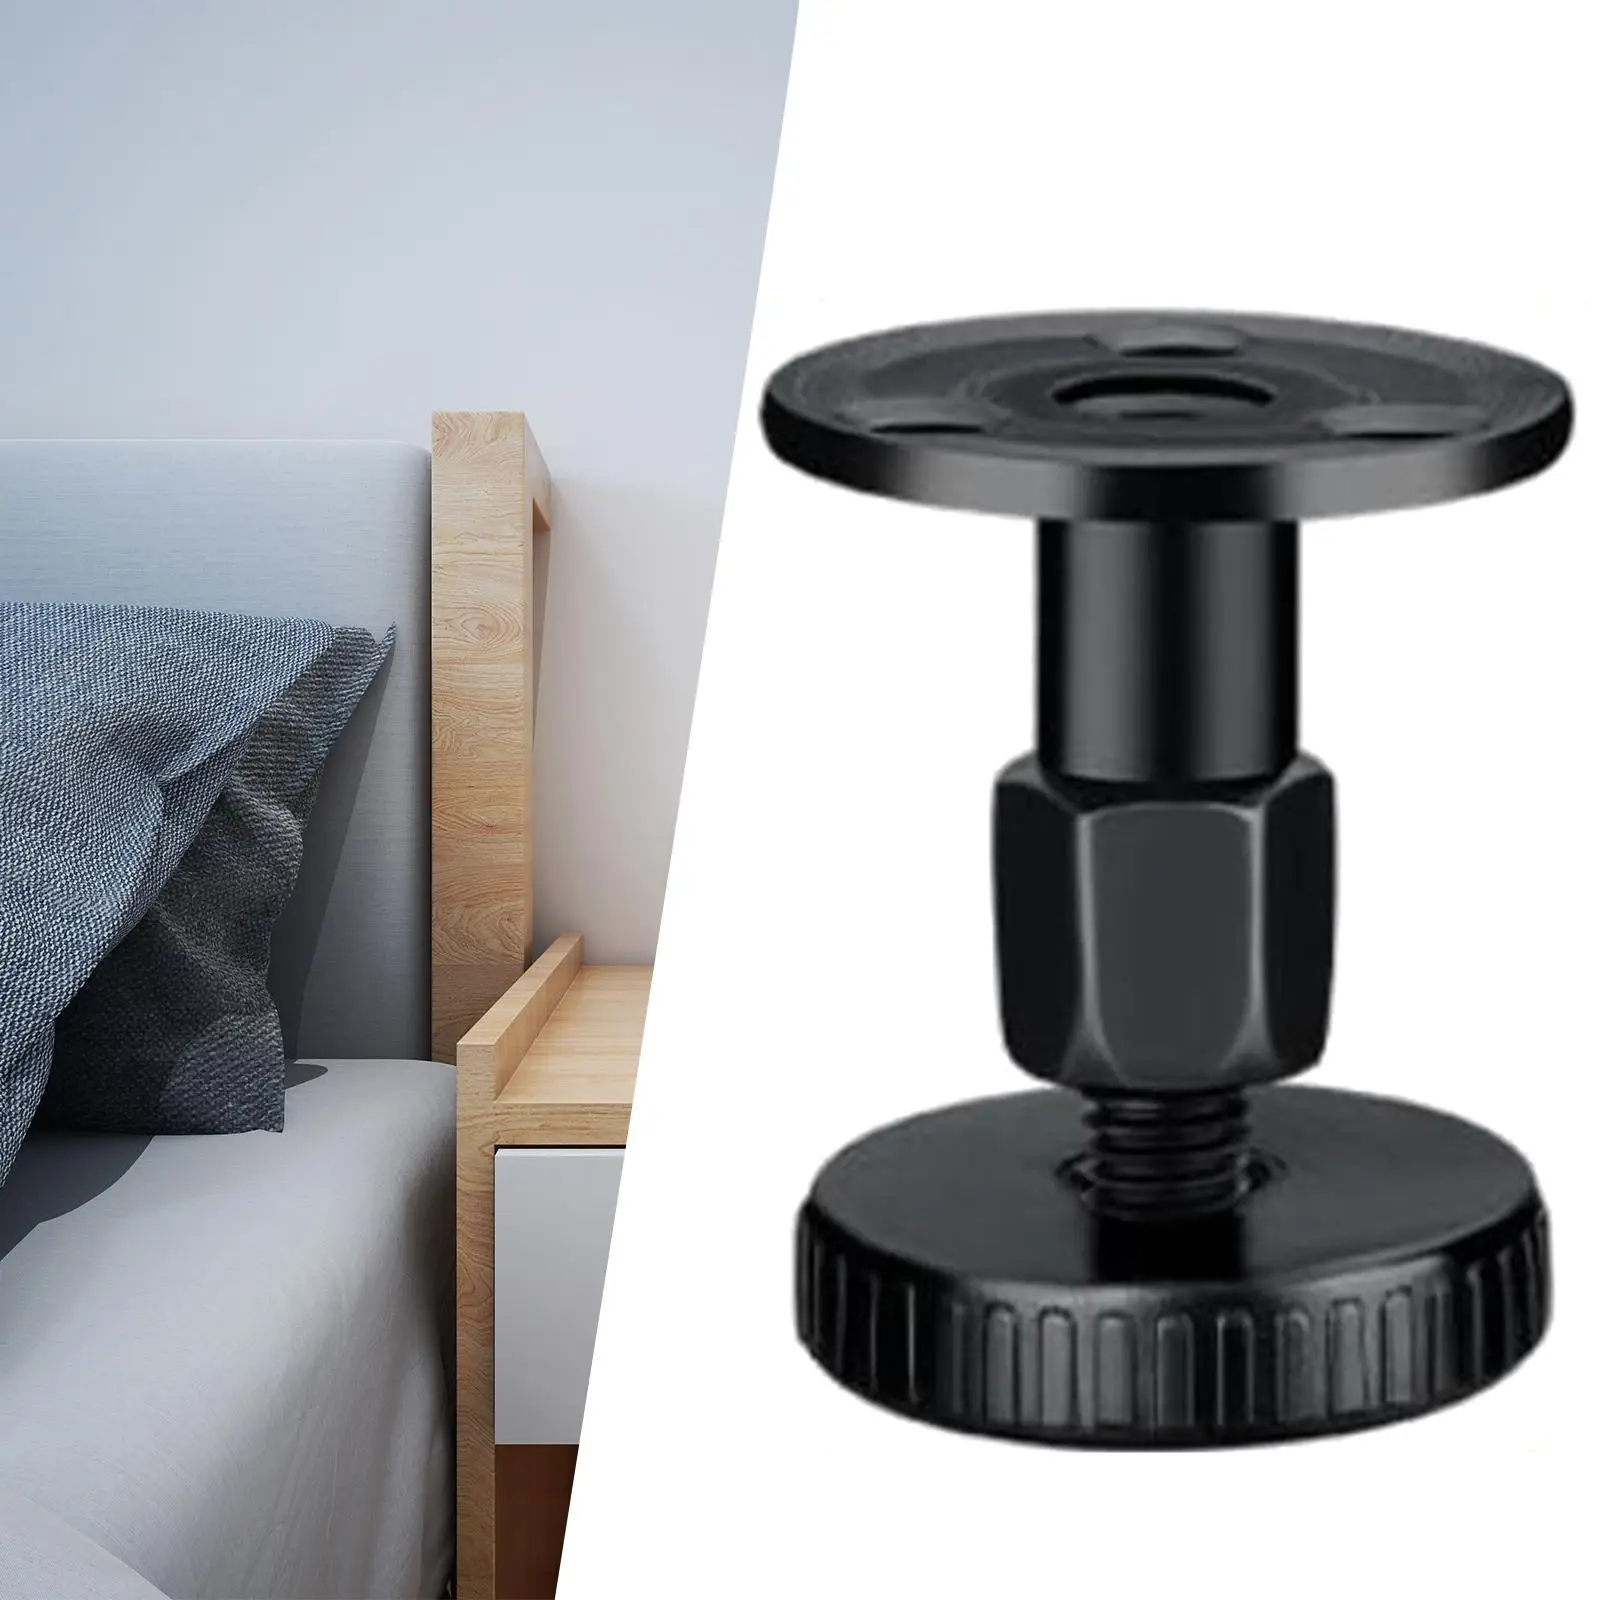 Bedside Fixer Adjustable Threaded Bedside Anti Shaking Tool for Sofas Cabinets